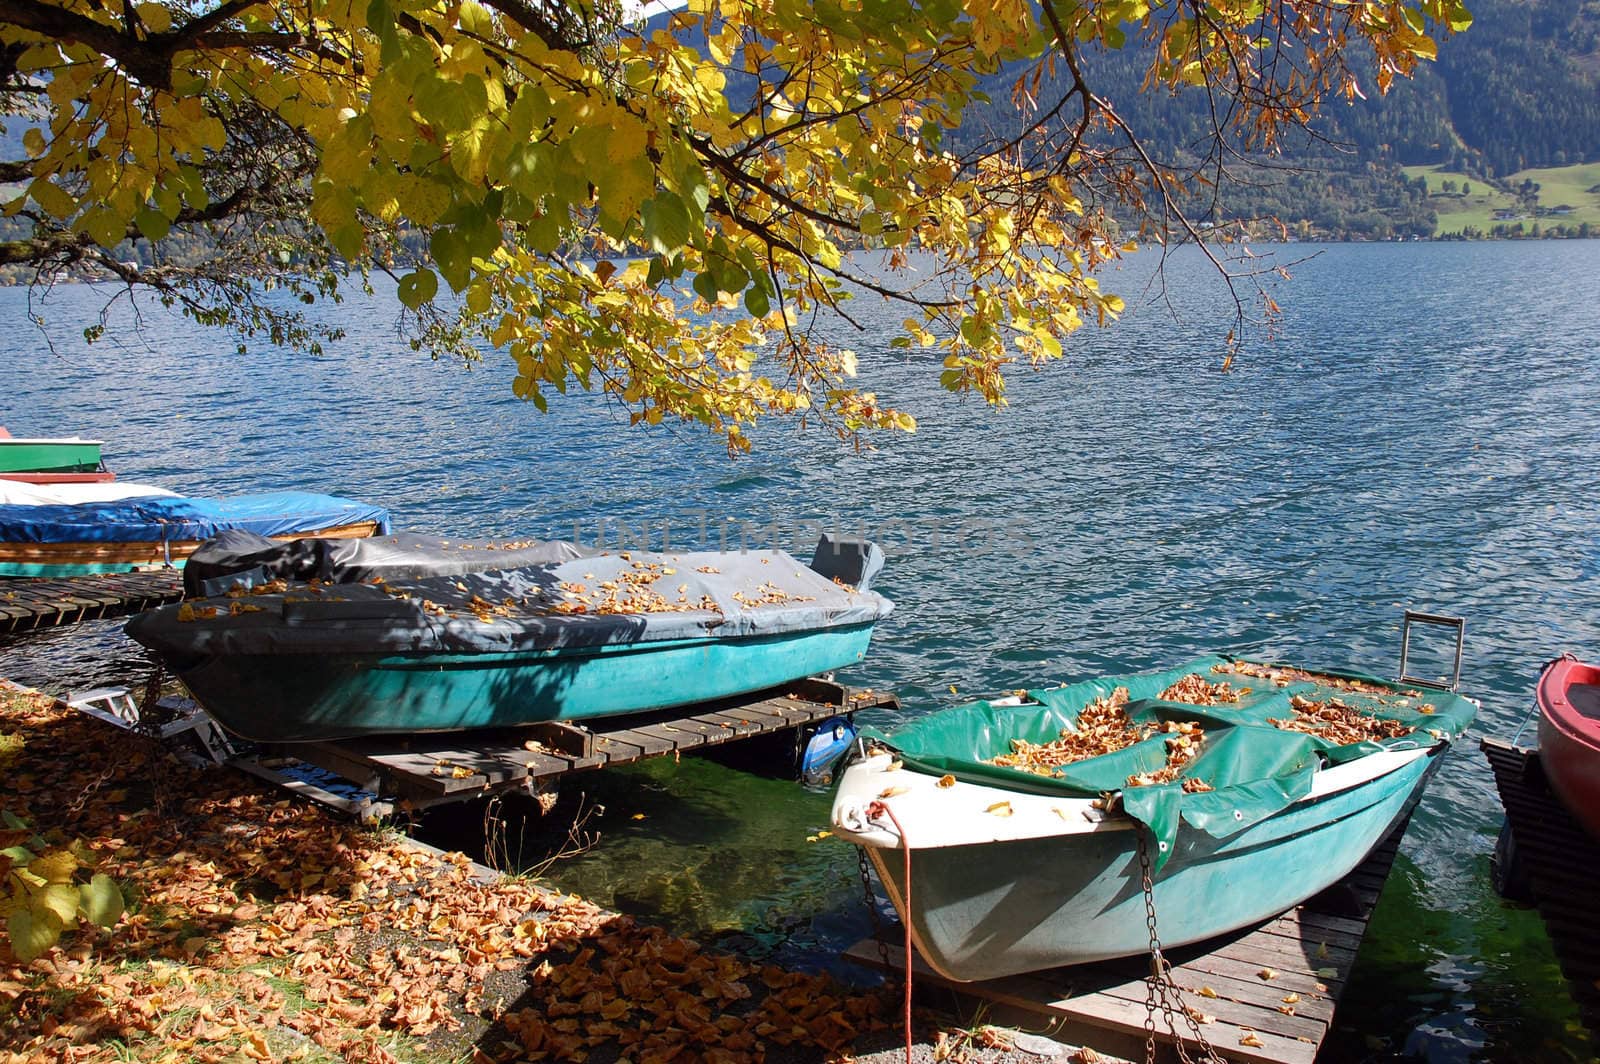 Boats in autumn by fahrner